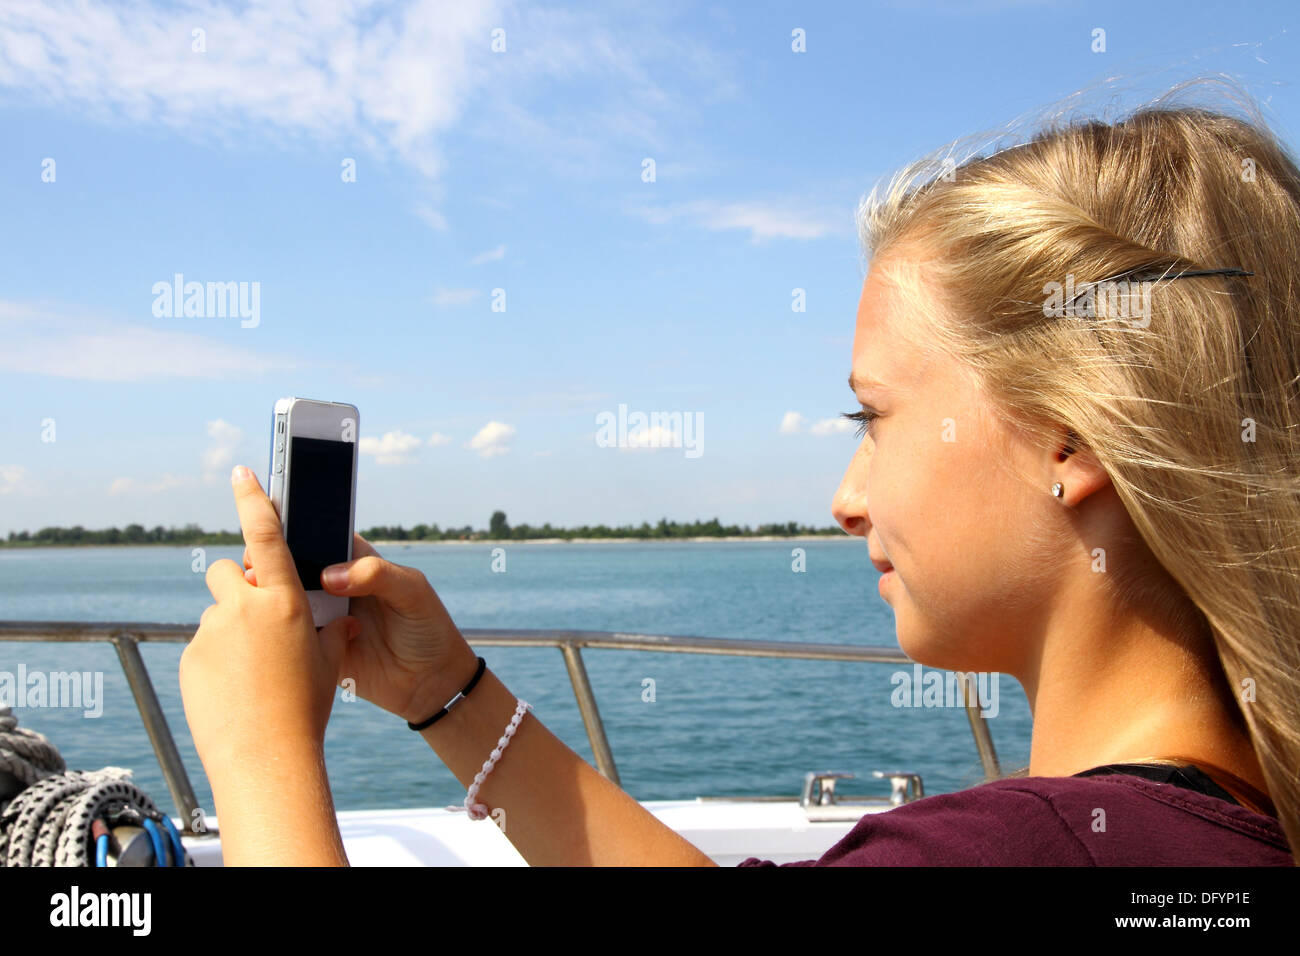 Smiling blond girl with phone on the boat, horizontal Stock Photo